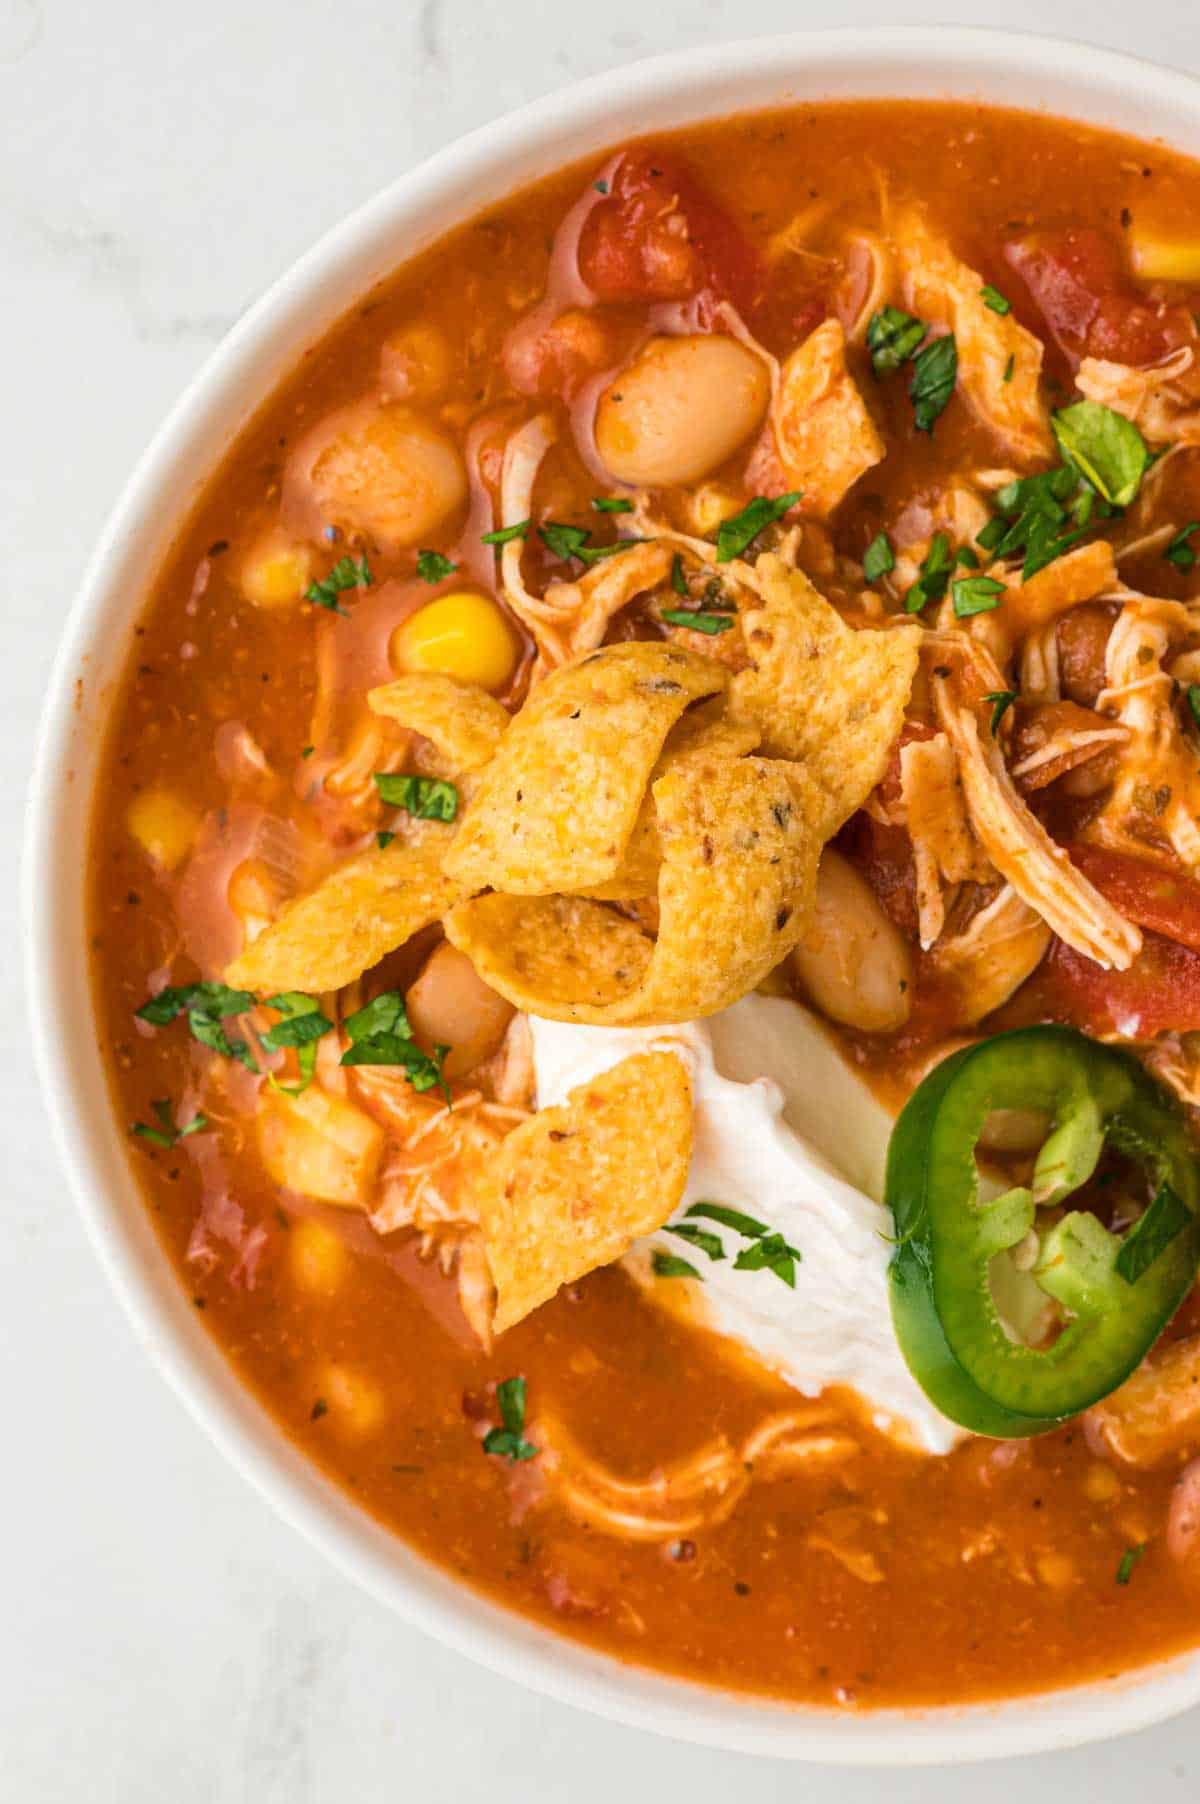 A bowl of chicken chili topped with frito chips, sour cream, jalapeno slice and chopped herbs.